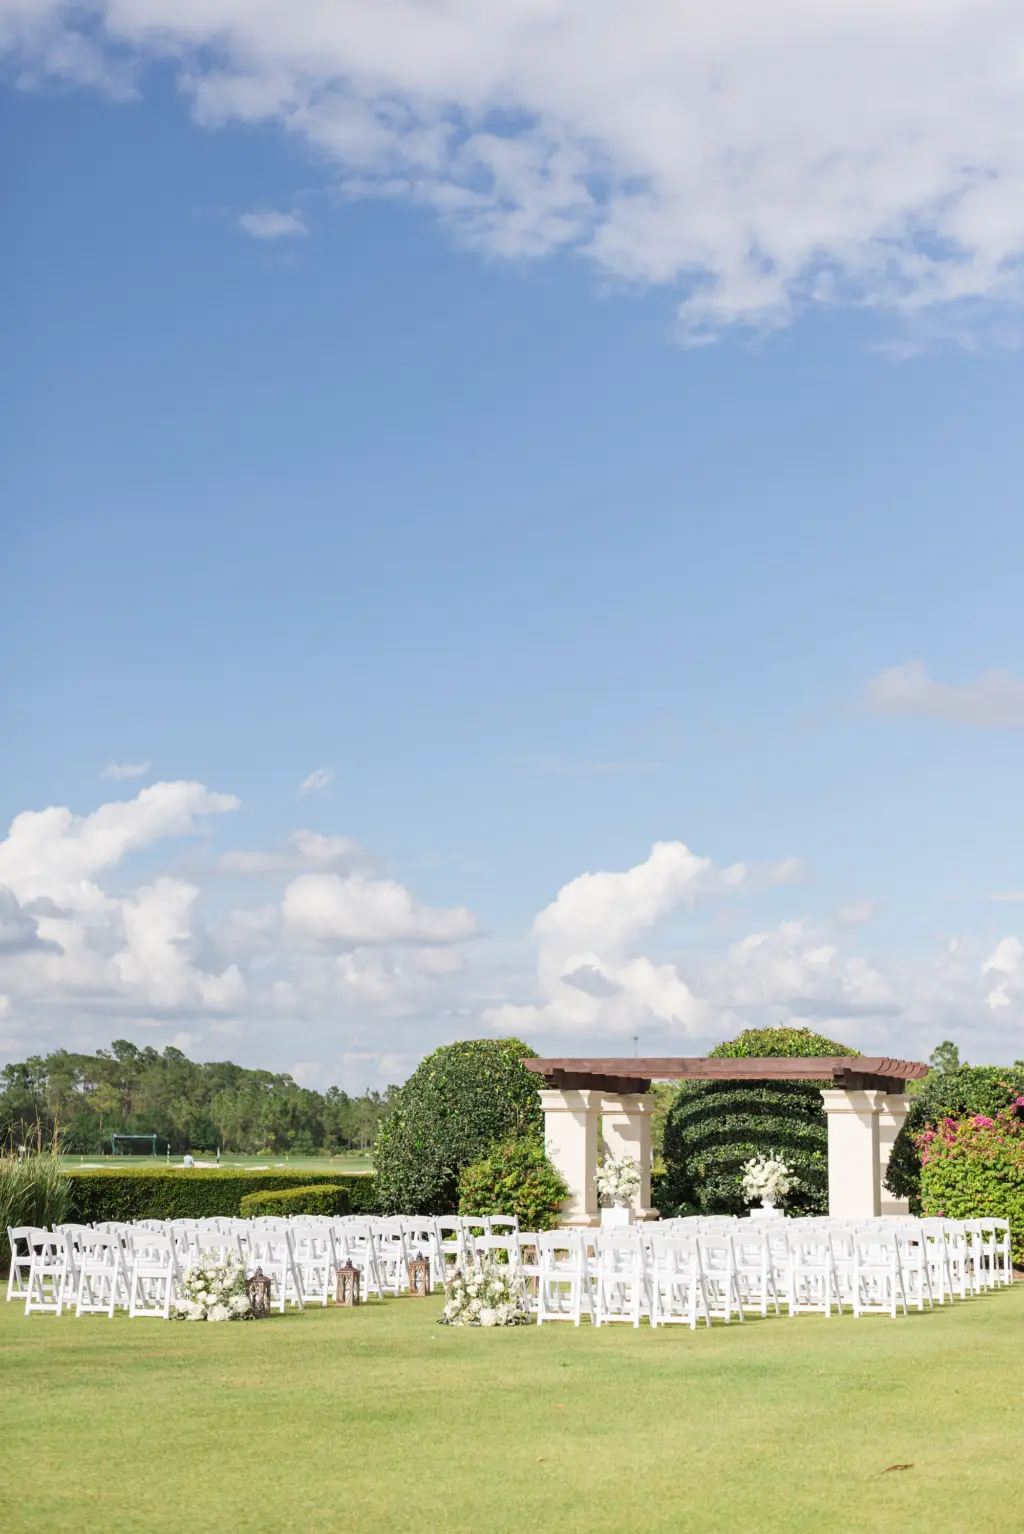 Elegant Outdoor Wedding Ceremony on Event Lawn | White Garden Chairs and Wooden Pergola | Tampa Bay Event Venue The Concession Golf Club